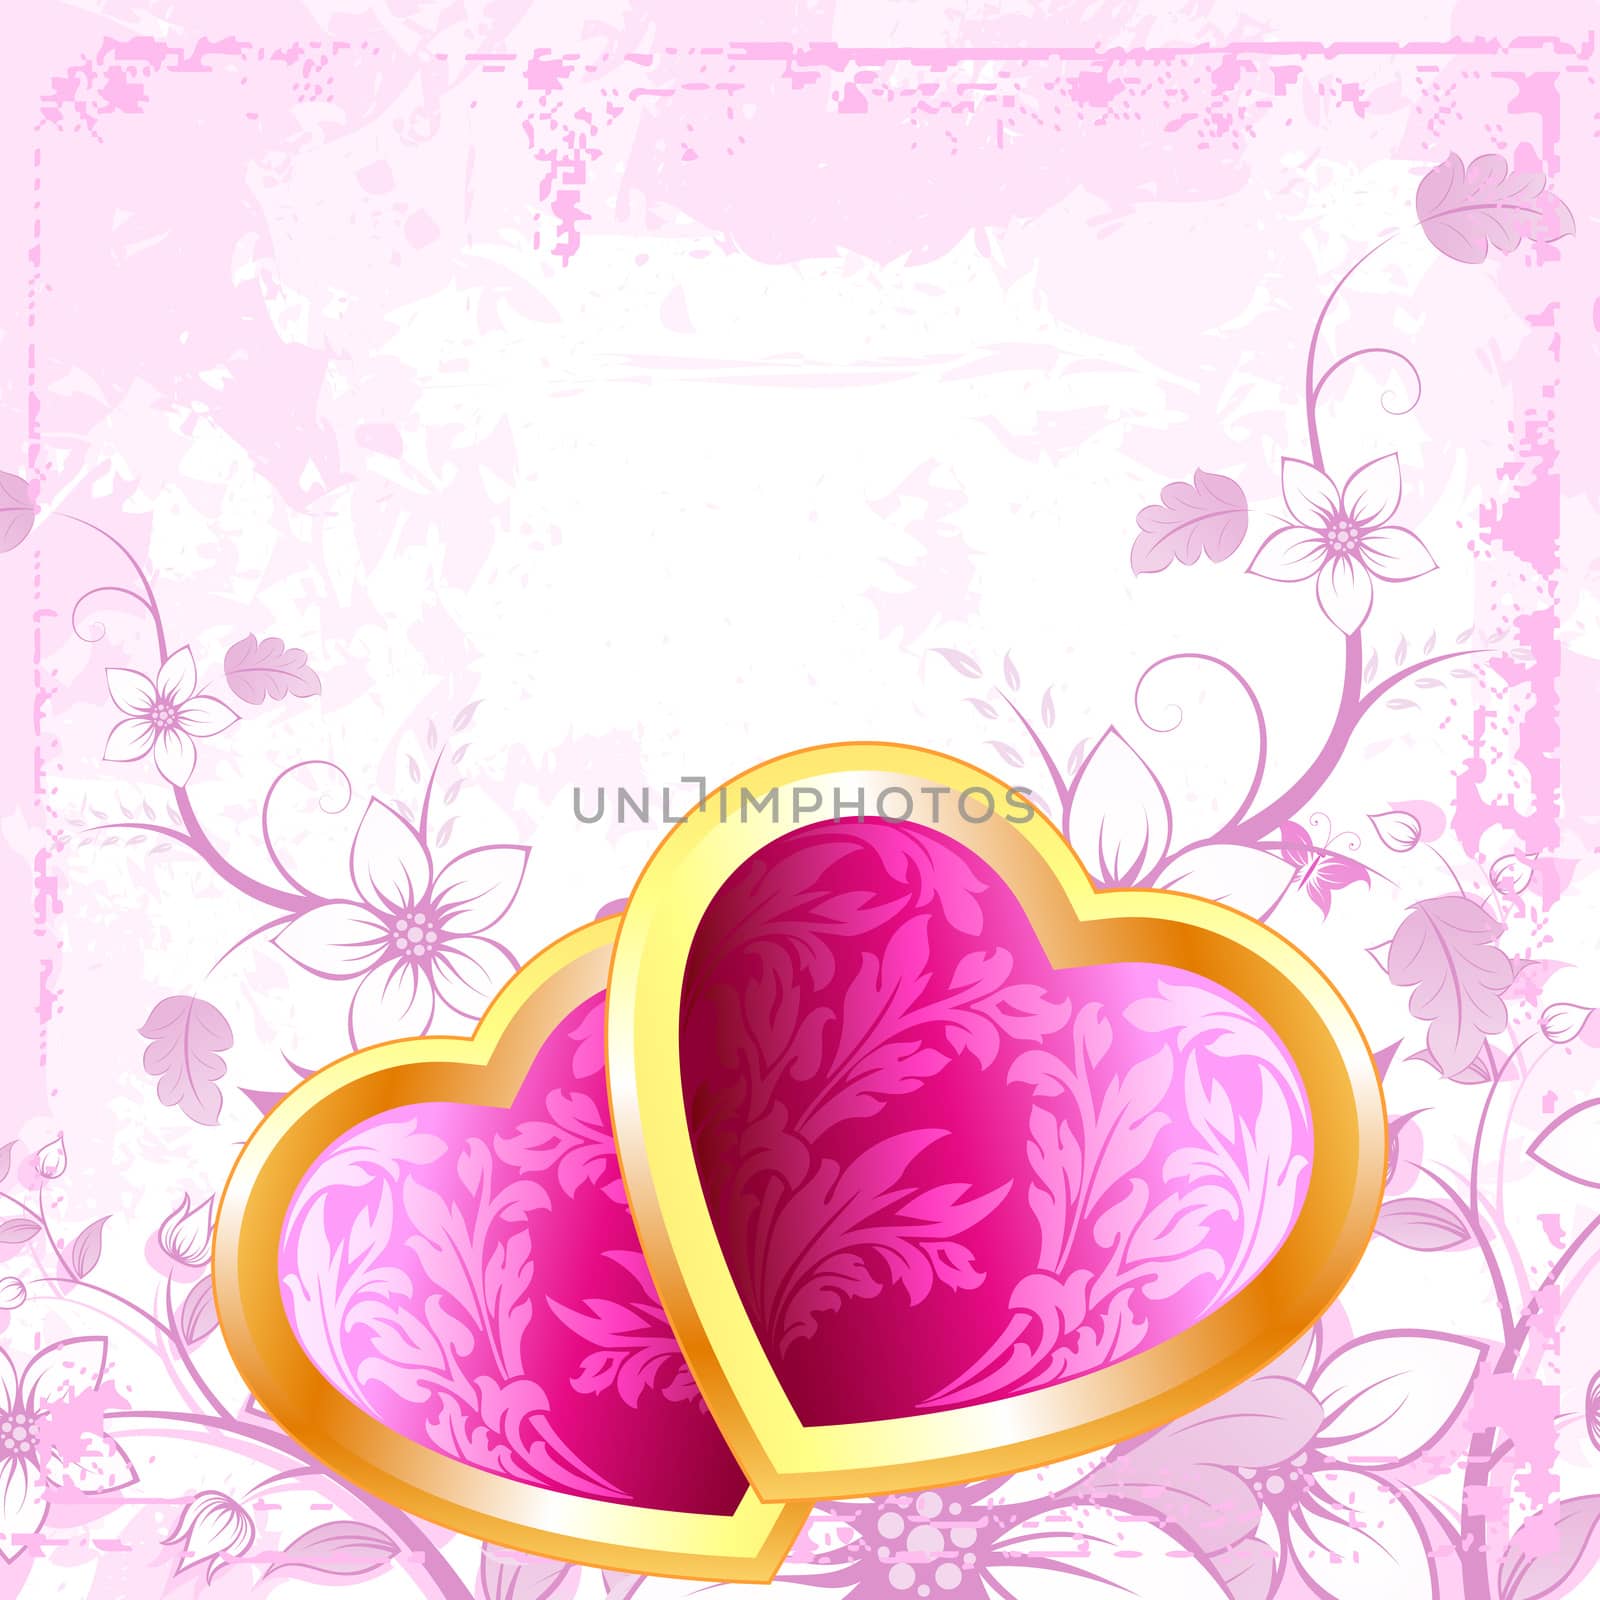 Valentine's Day Hearts with flowers on grunge background